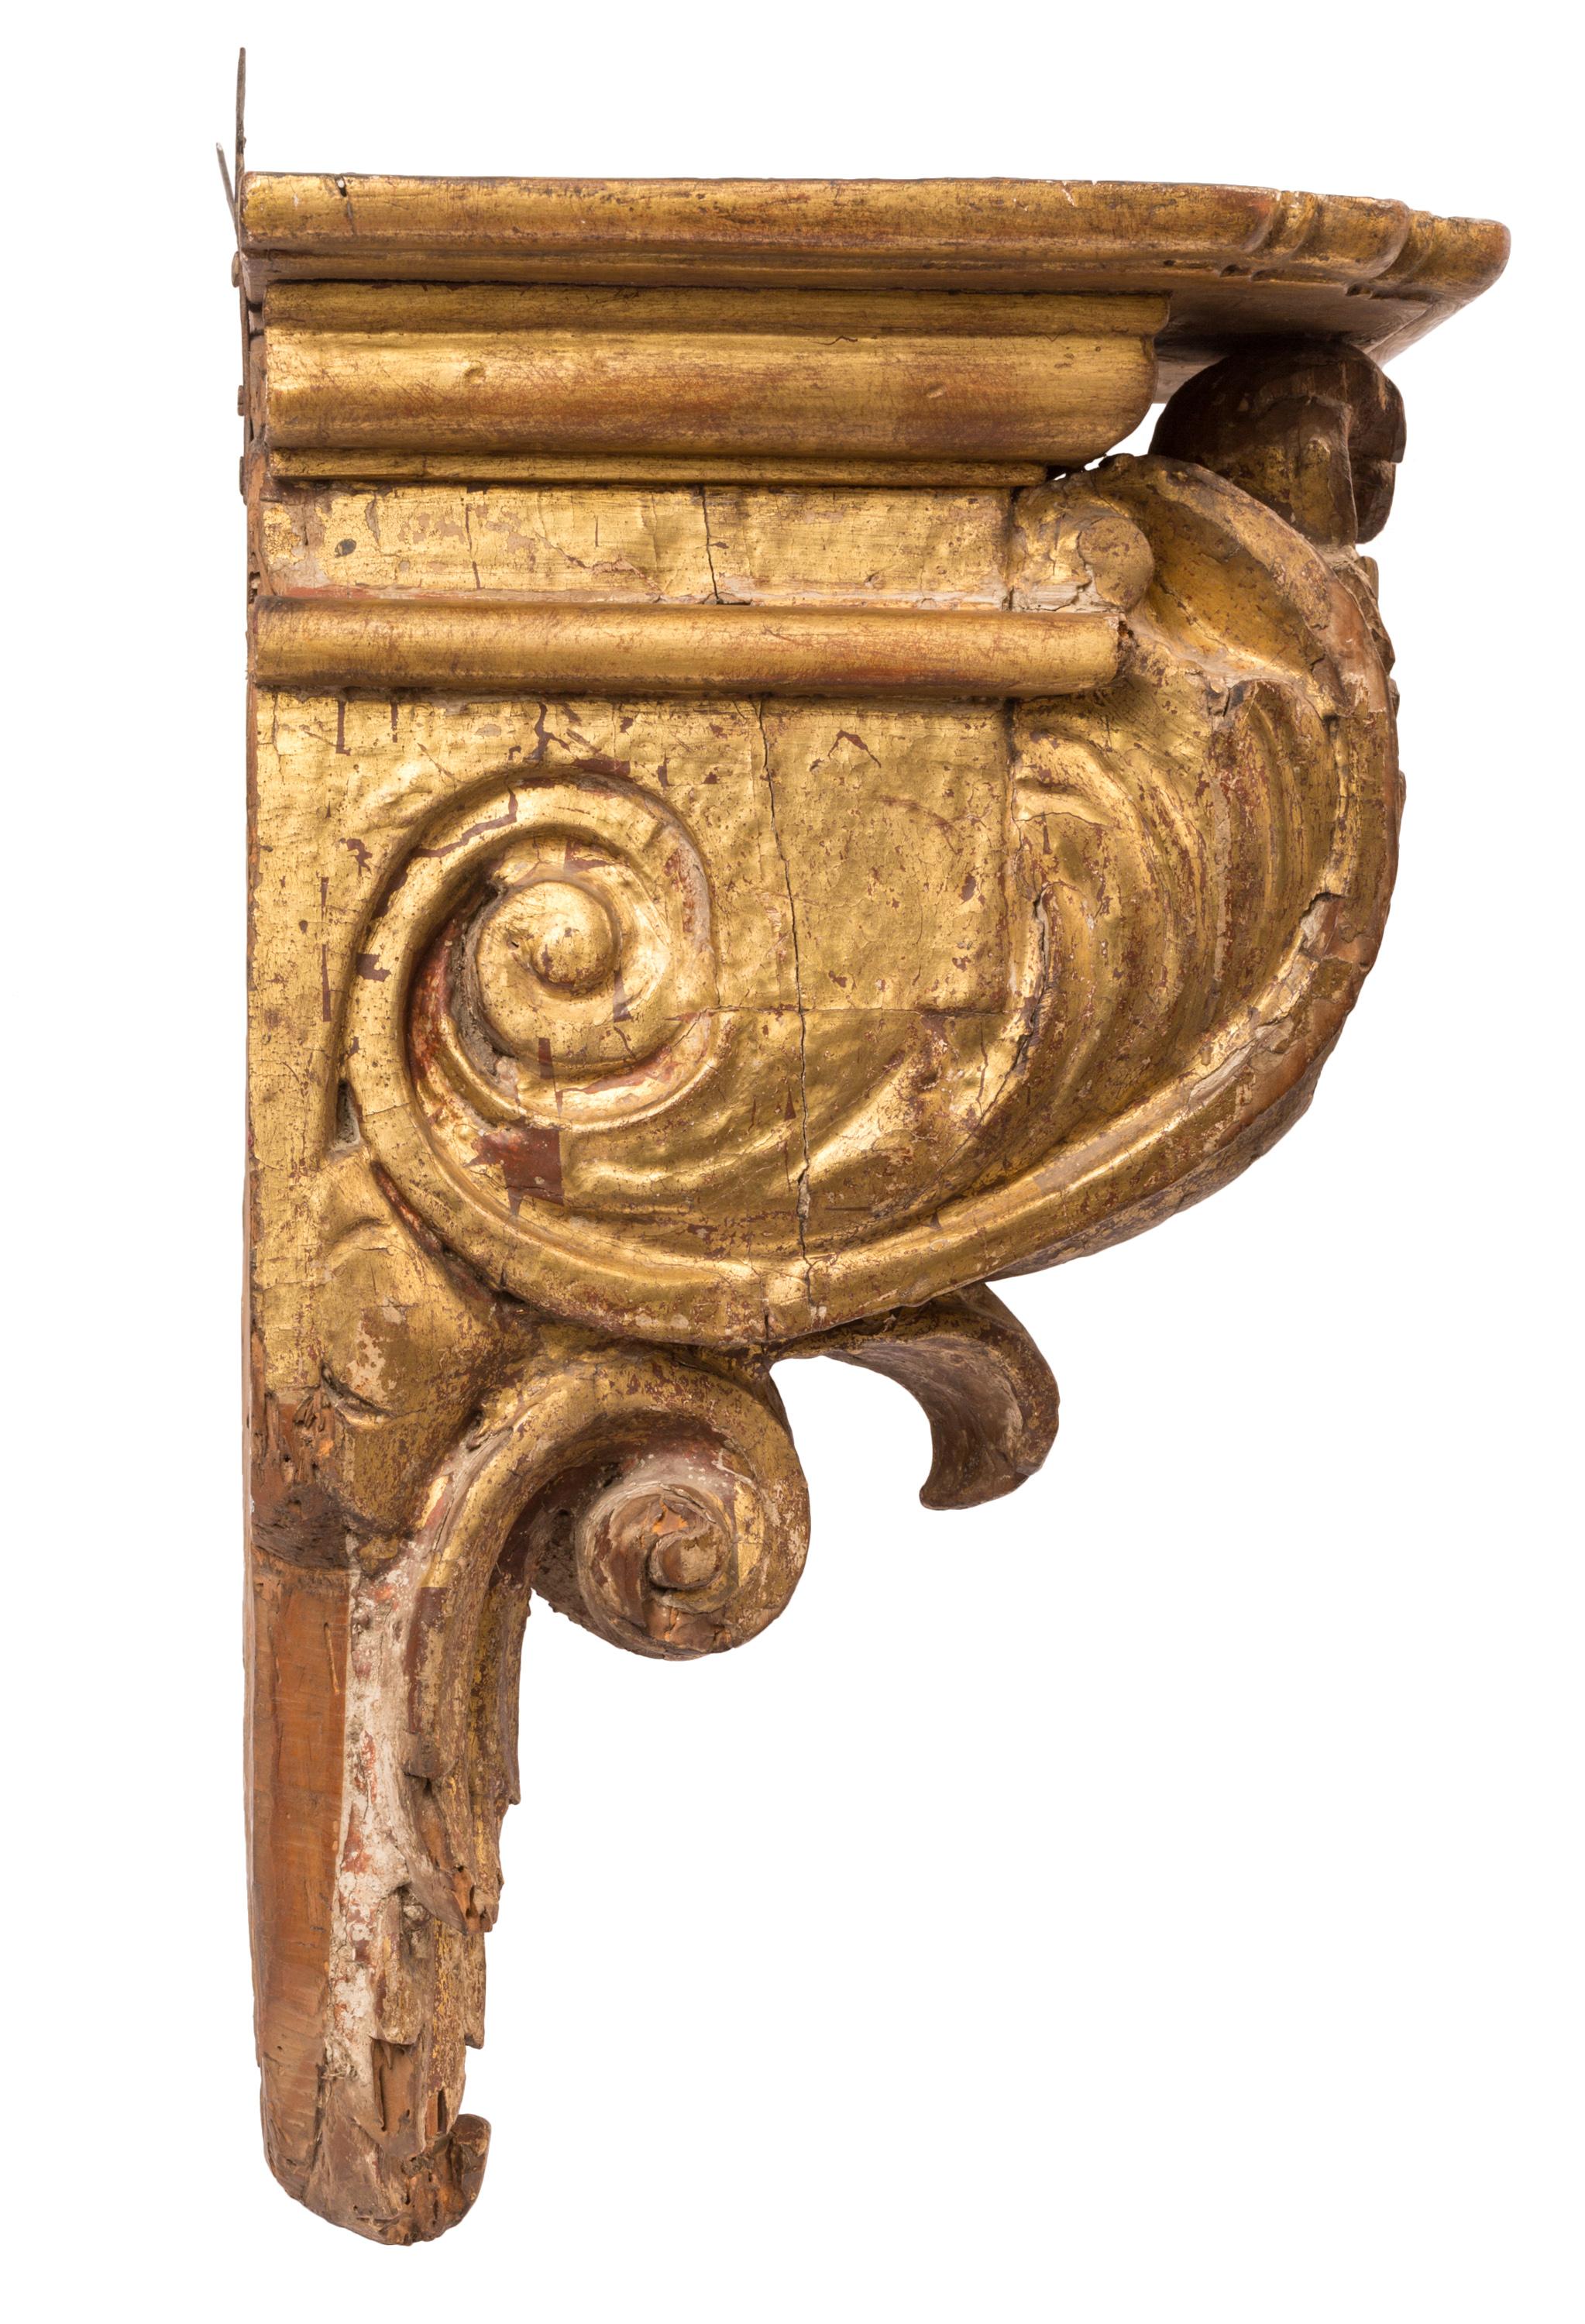 This hand carved giltwood shelf / wall bracket or architectural corbel clearly displays the strength, drama and beauty of Spanish Baroque style. The central design motif is that of double scrolled acanthus leaves, with a row of 